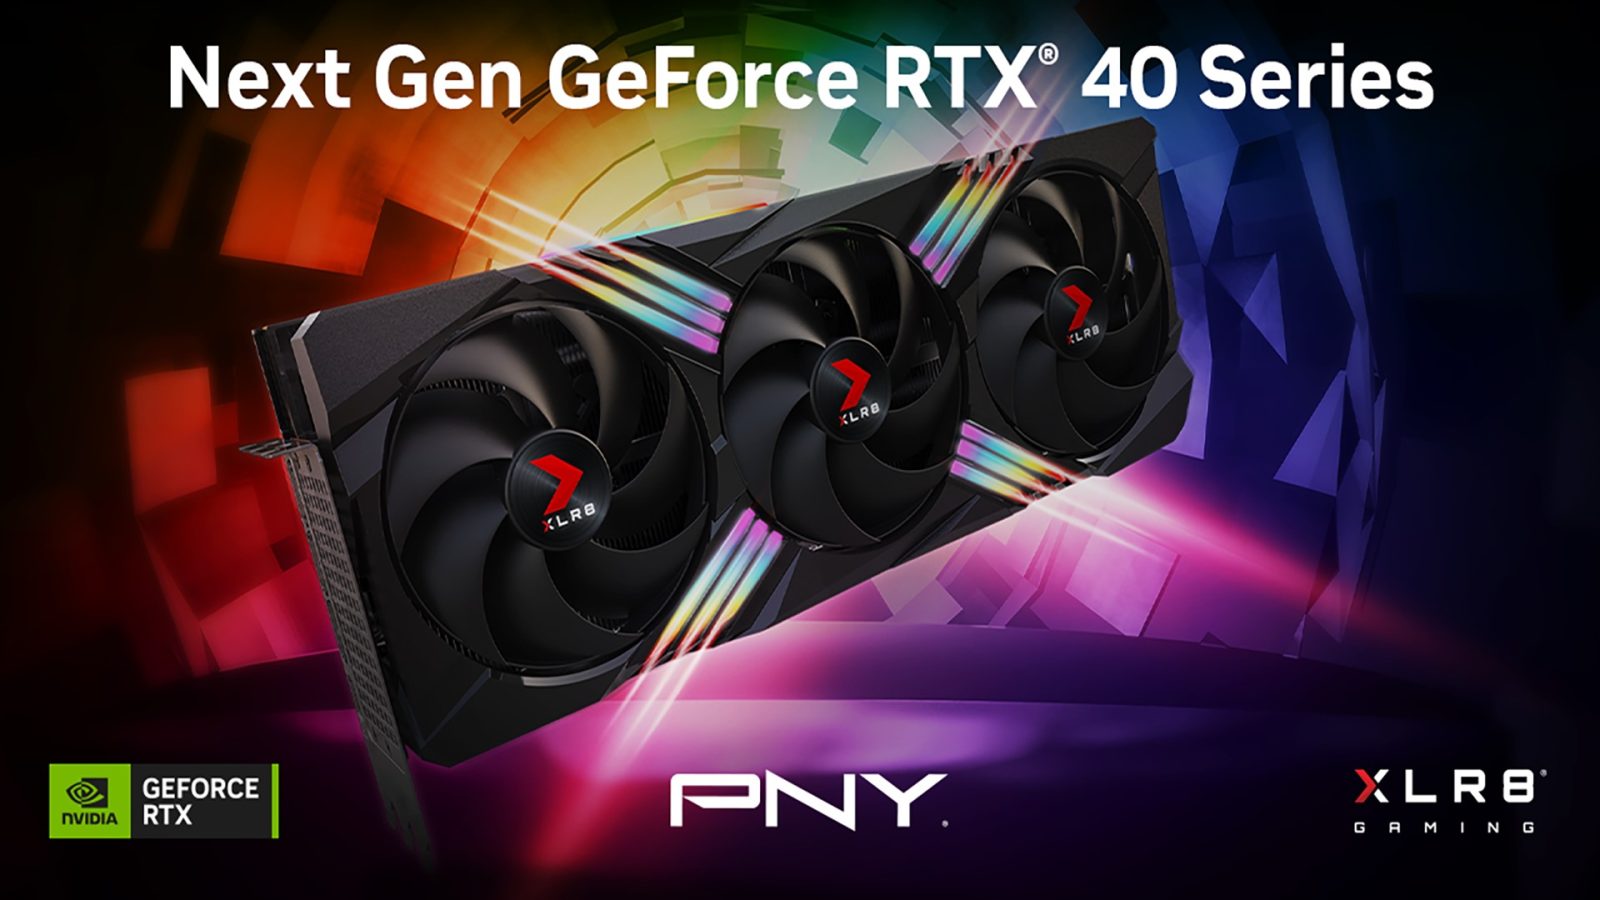 Land At øge Kom op PNY introduces 3 new GPUs, the GeForce RTX 4090, RTX 4080 16GB, and the RTX  4080 12GB - GAMING TREND